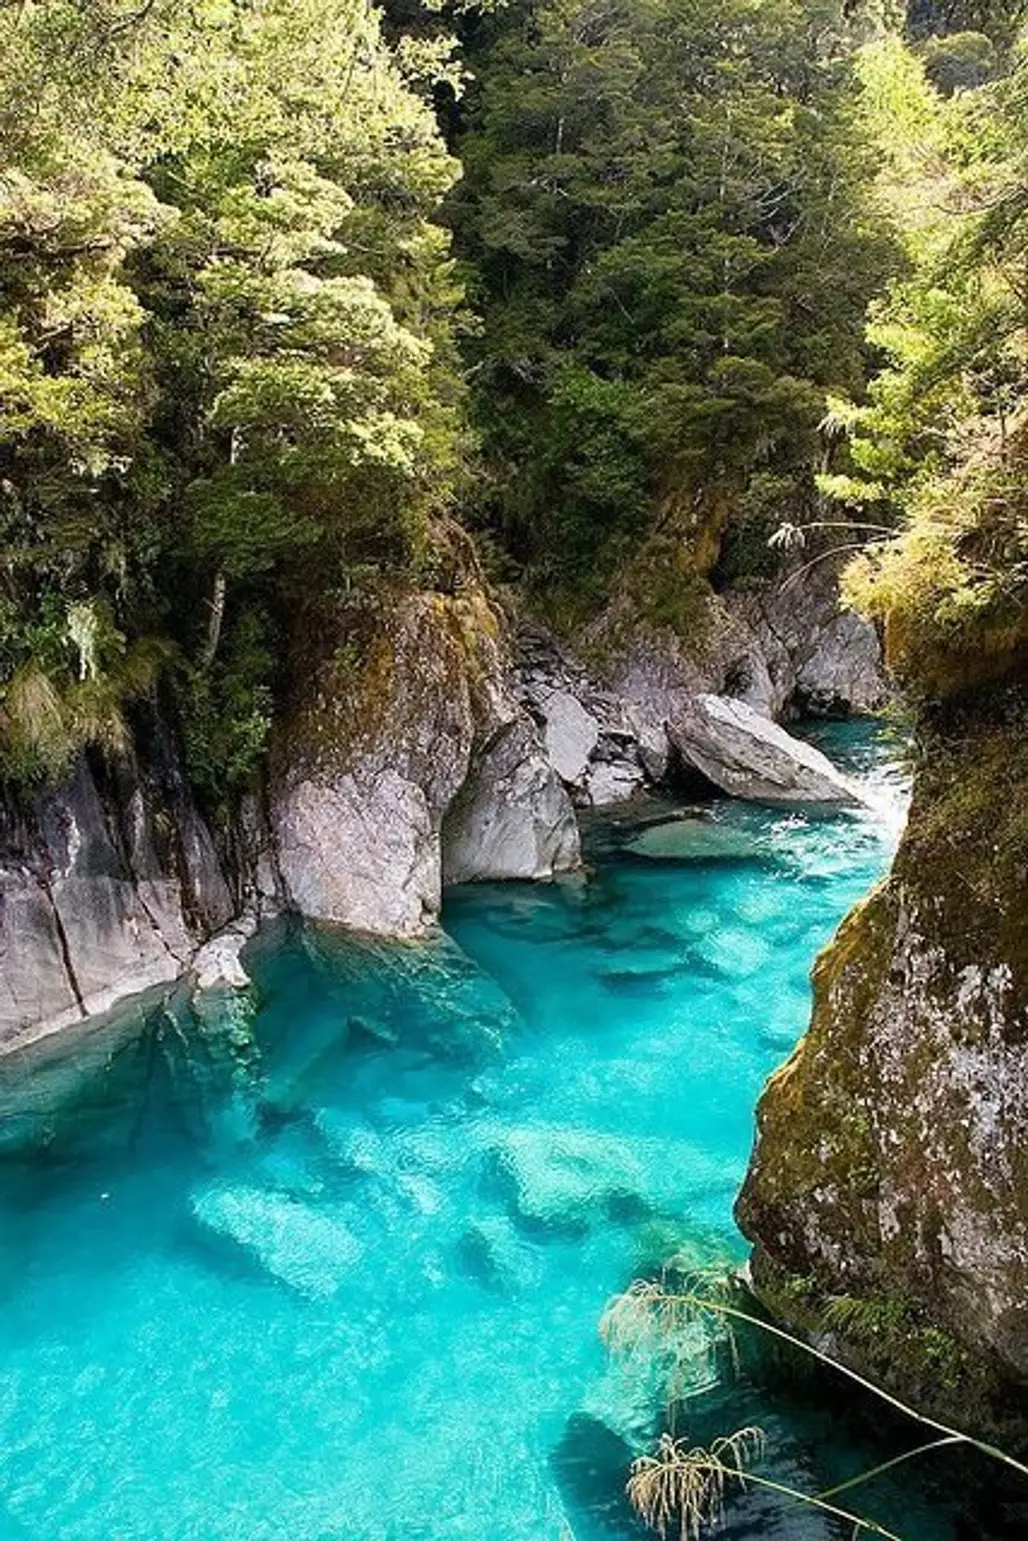 The Blue Pools, Queenstown